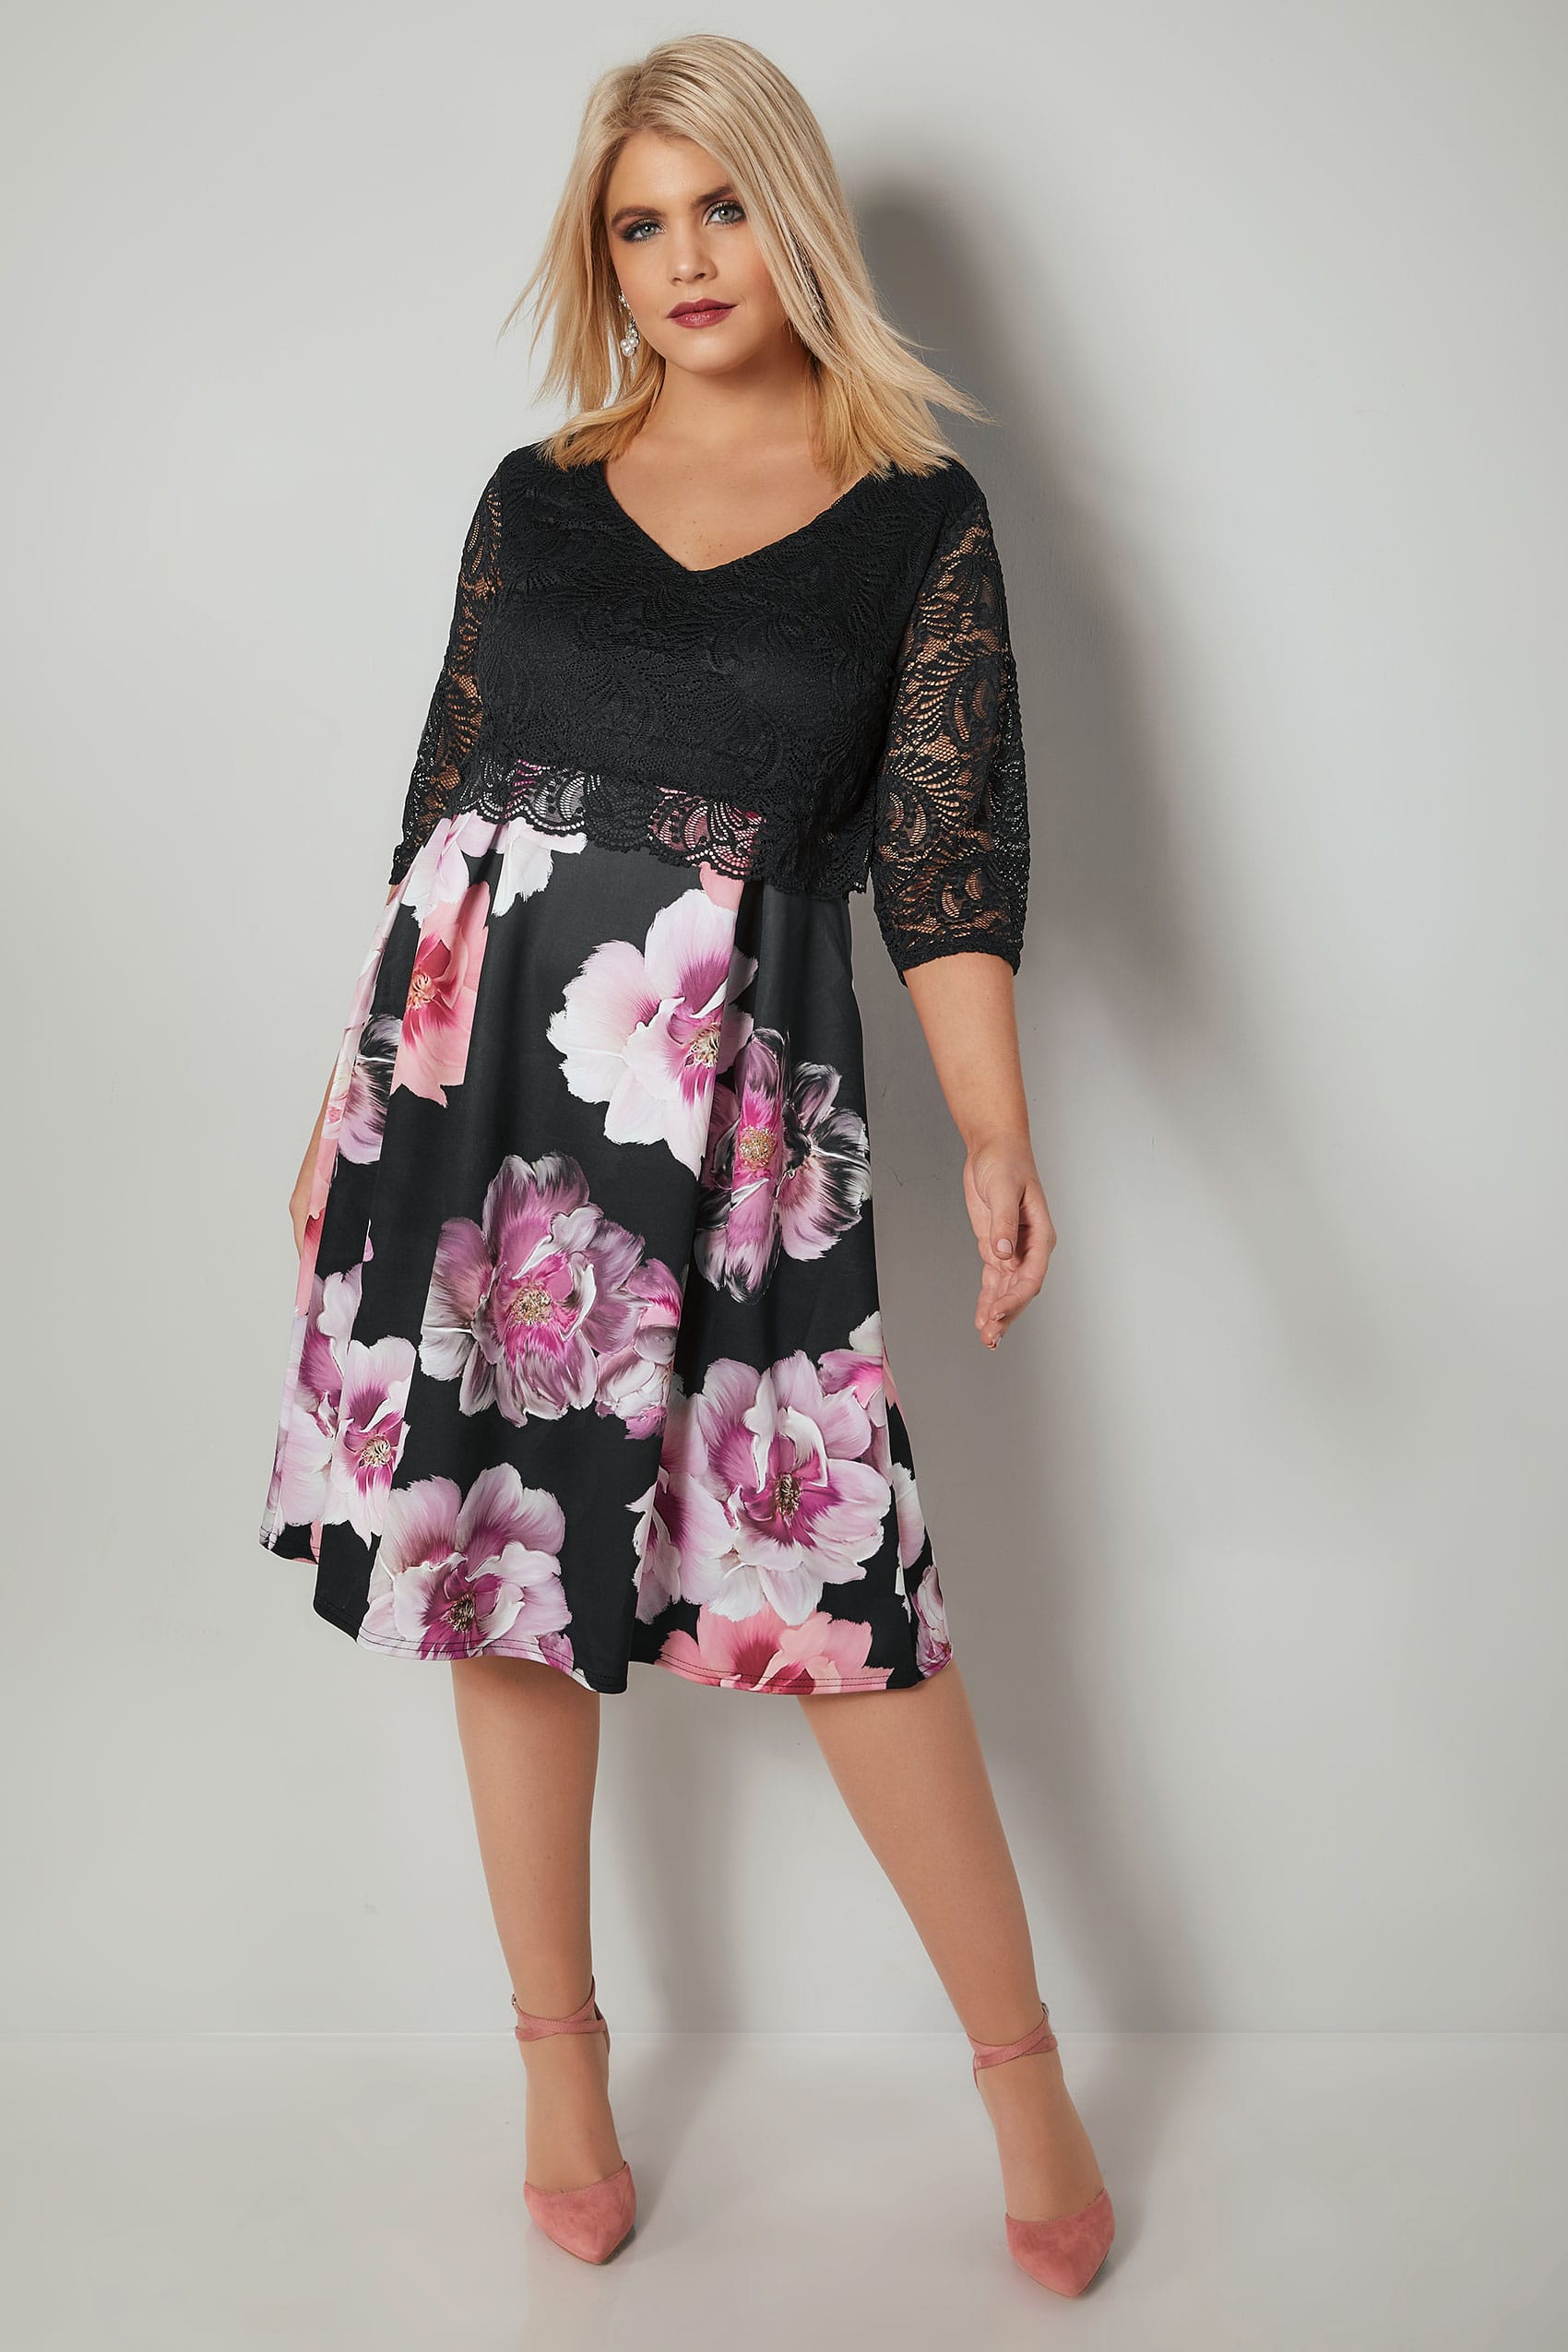 YOURS LONDON Black & Pink Floral Print Lace Overlay Midi Dress, Plus ...